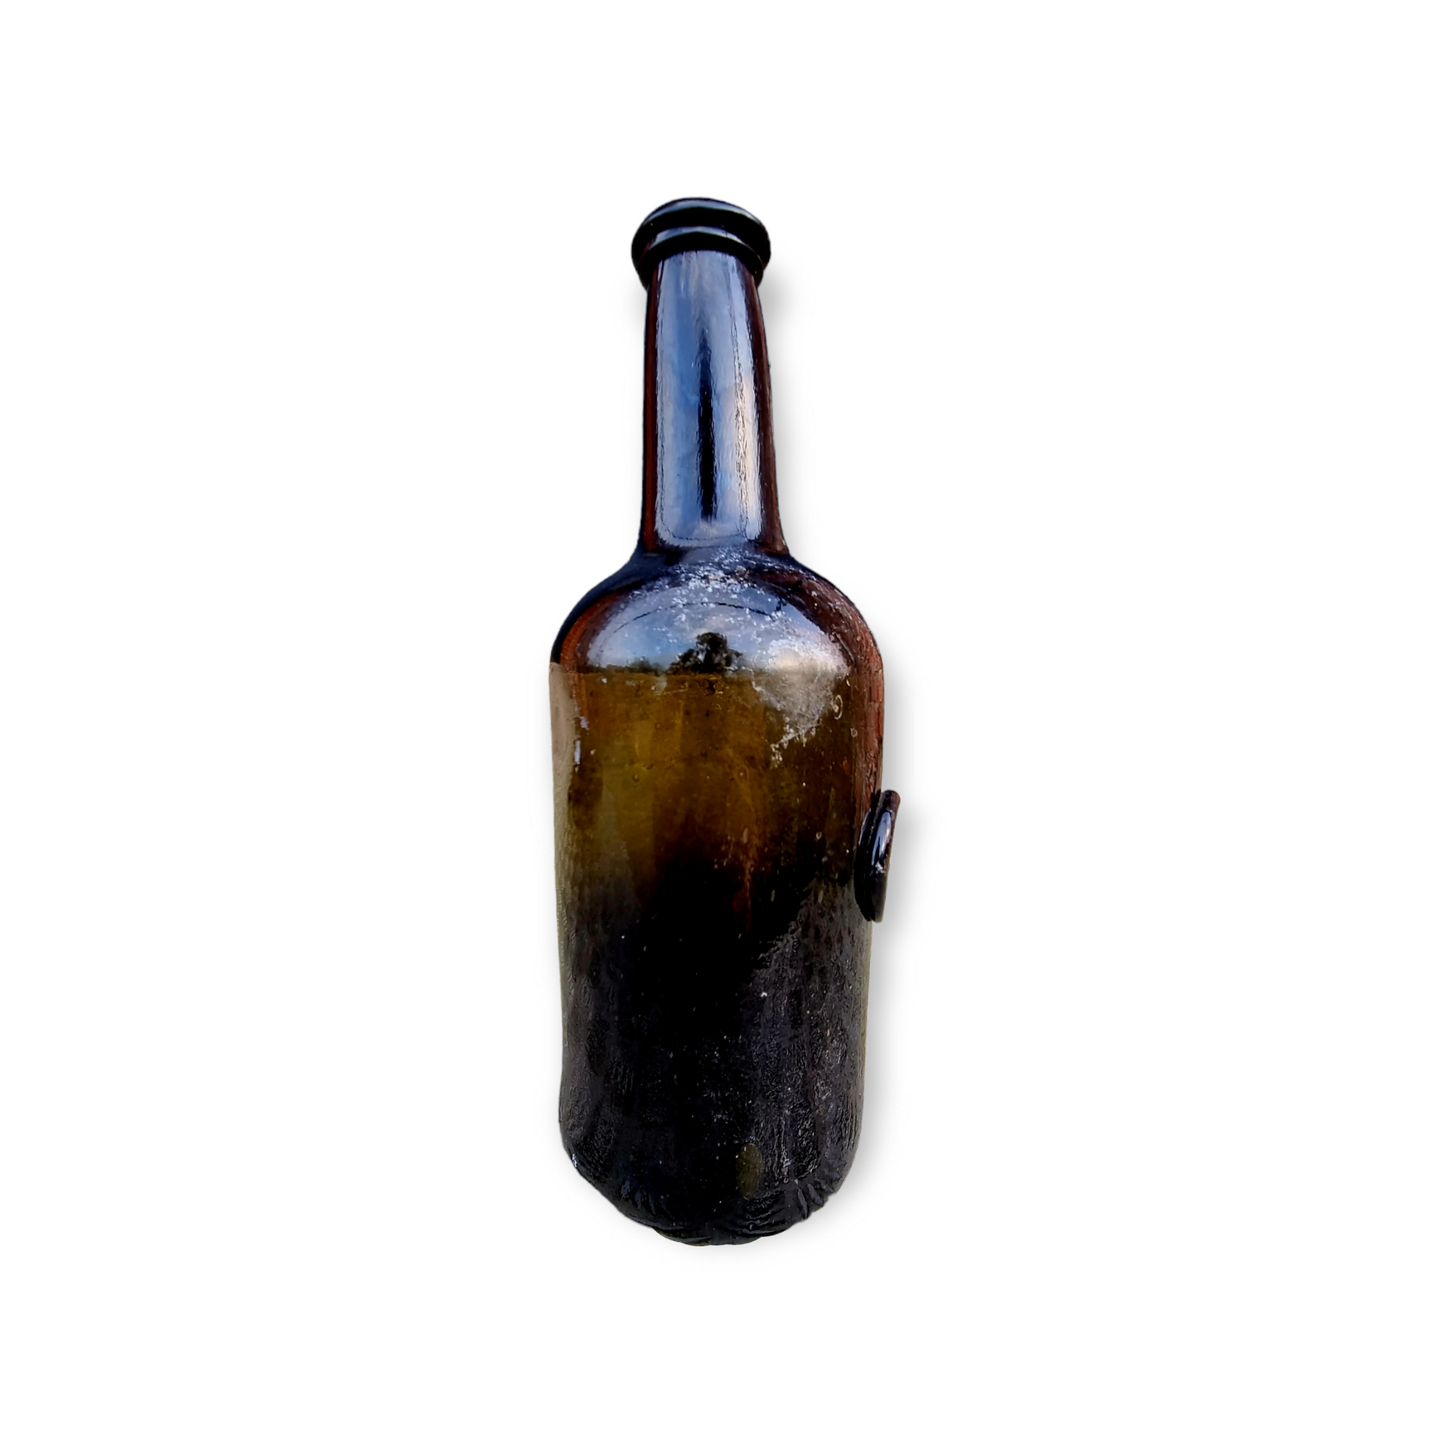 Mid 18th Century English Antique Seal Bottle, Bearing The Seal of The Edgcumbe Family